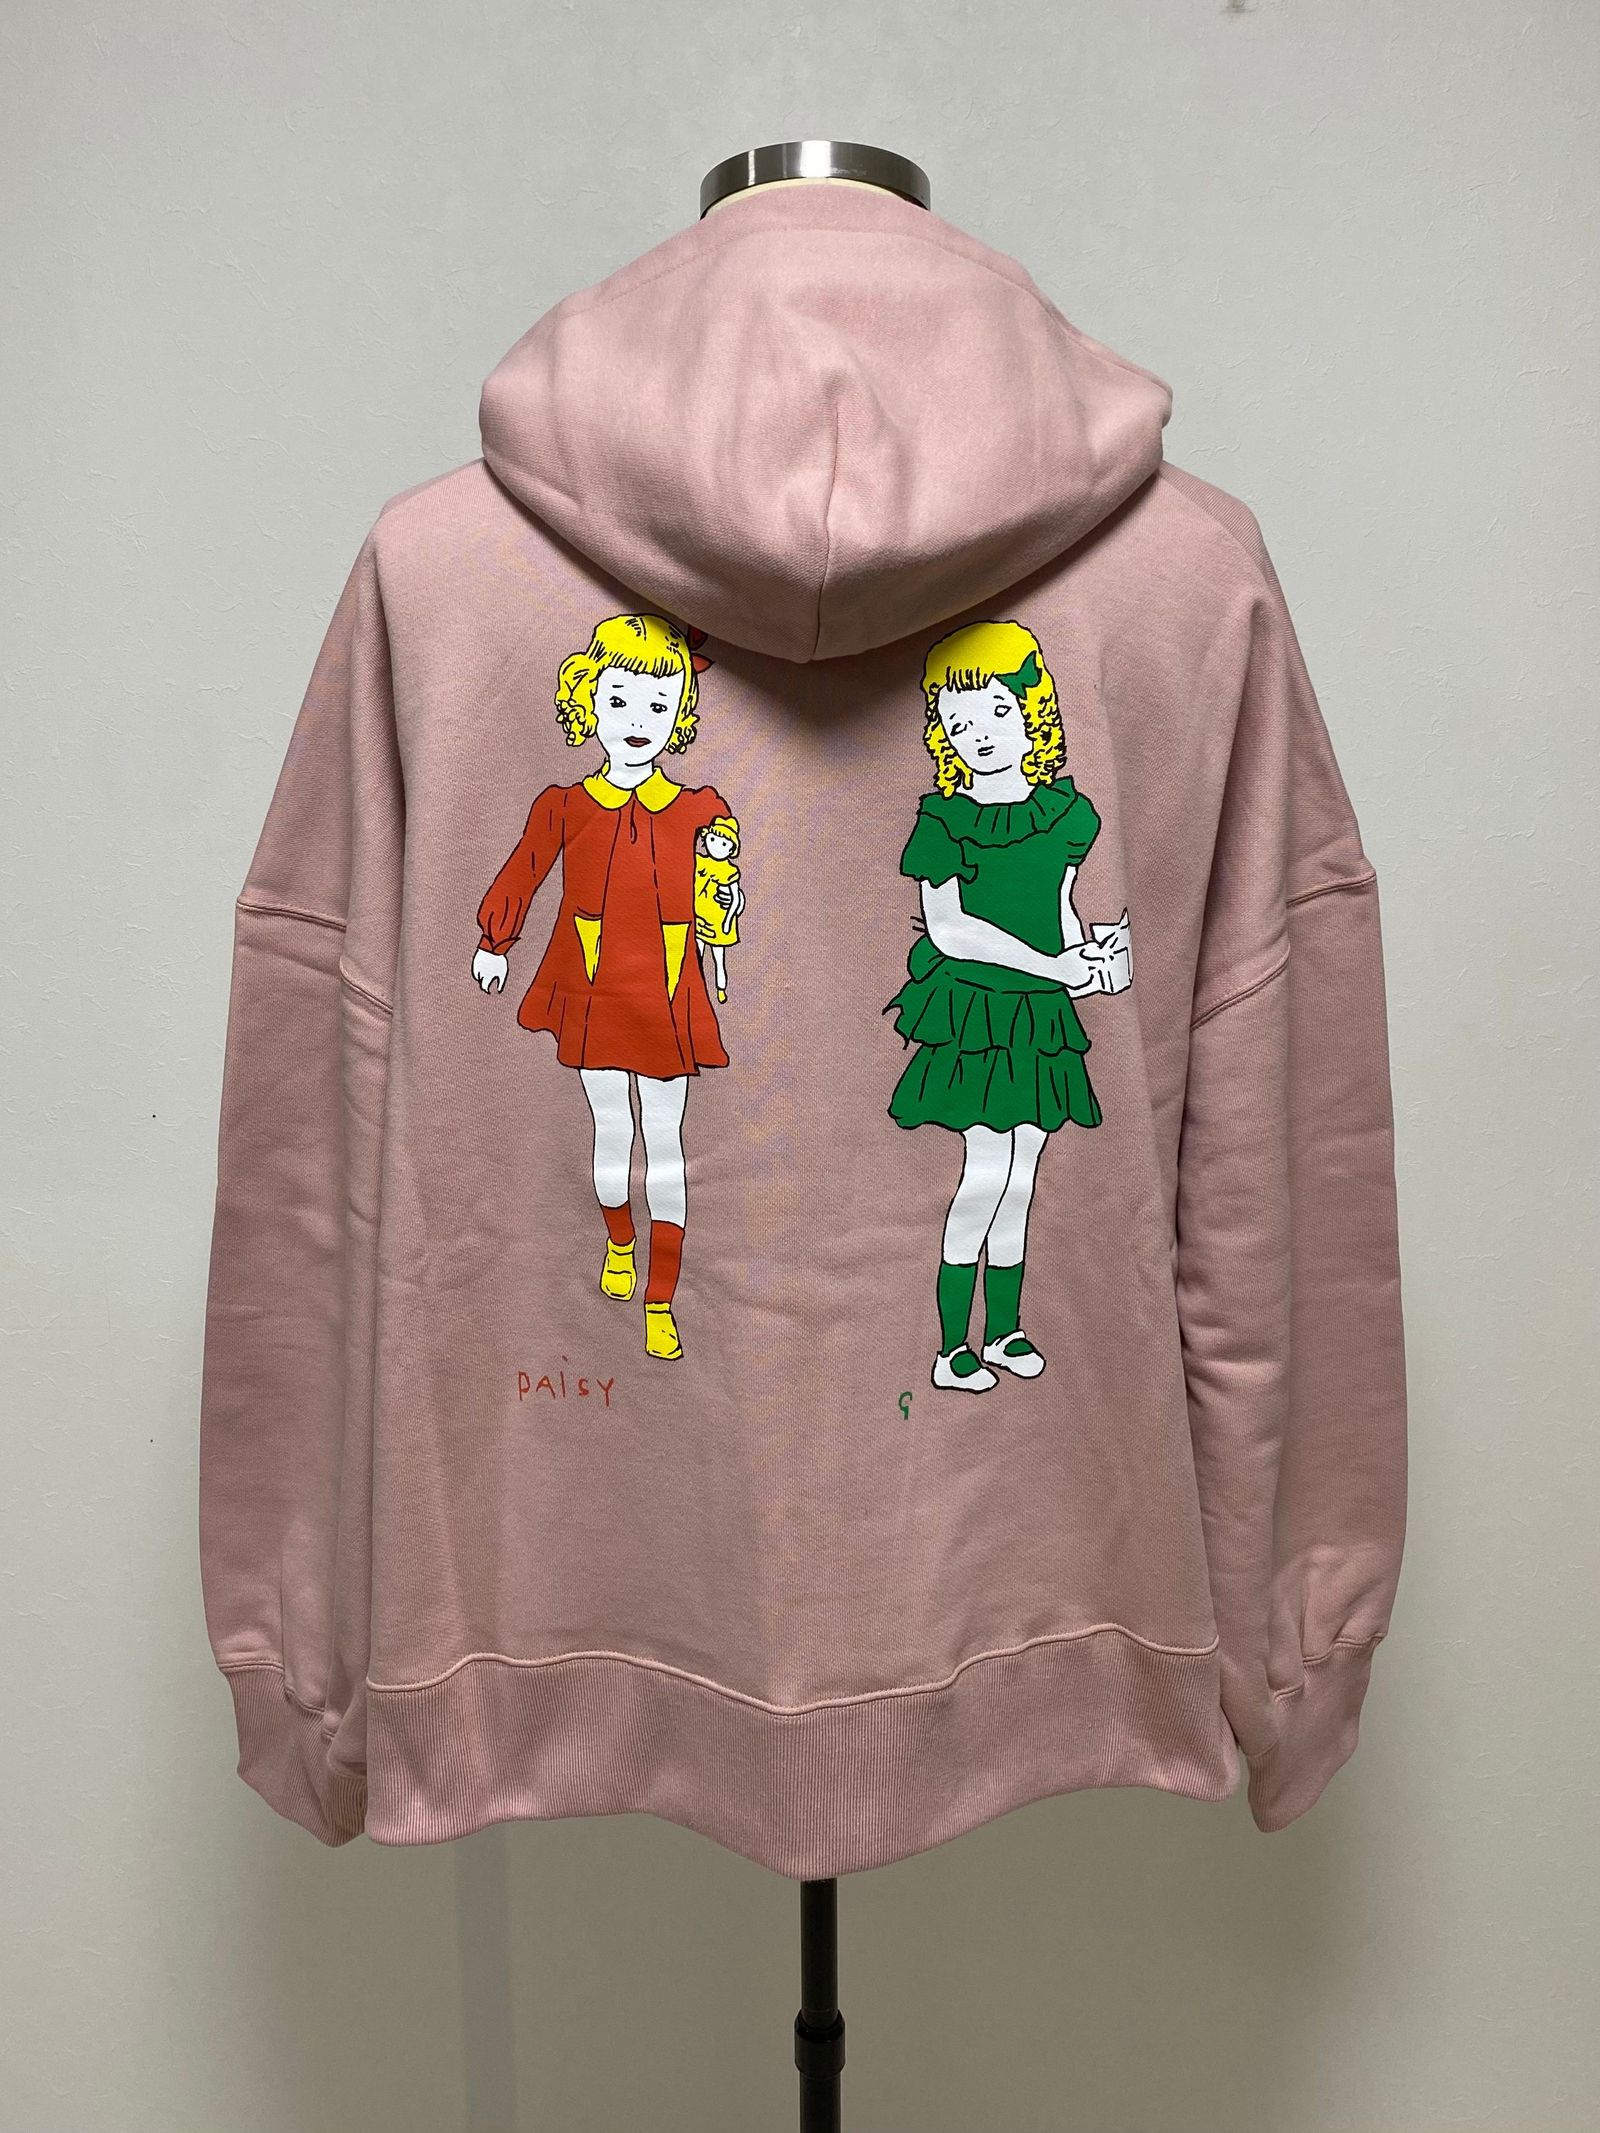 KIDILL - 【22AW】Daisy and G × Henry Darger コラボレーションジップ 